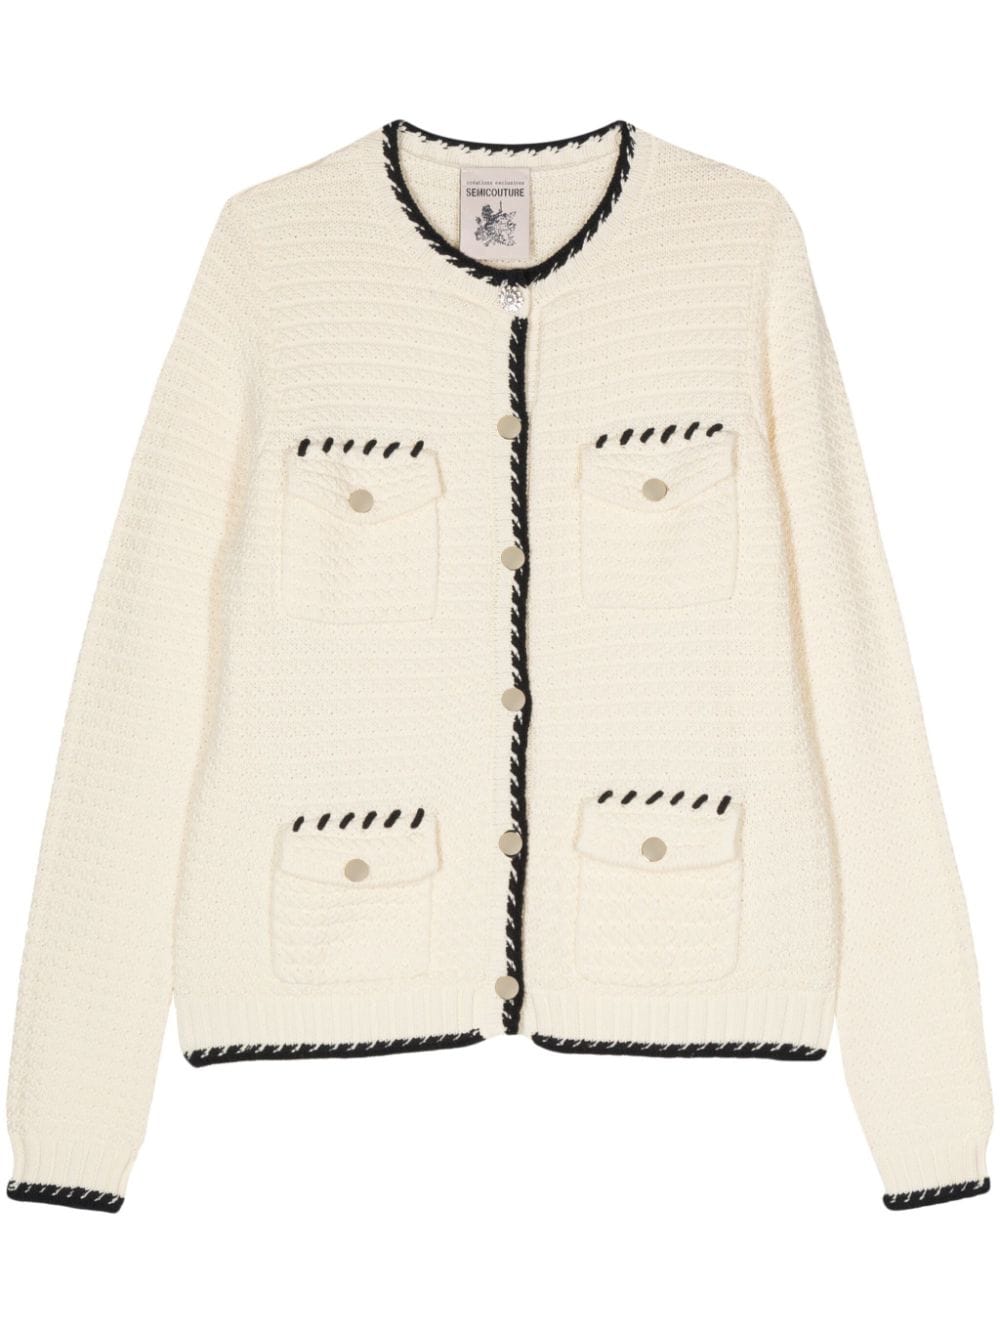 Semicouture contrasting-borders knitted cardigan - Neutrals von Semicouture